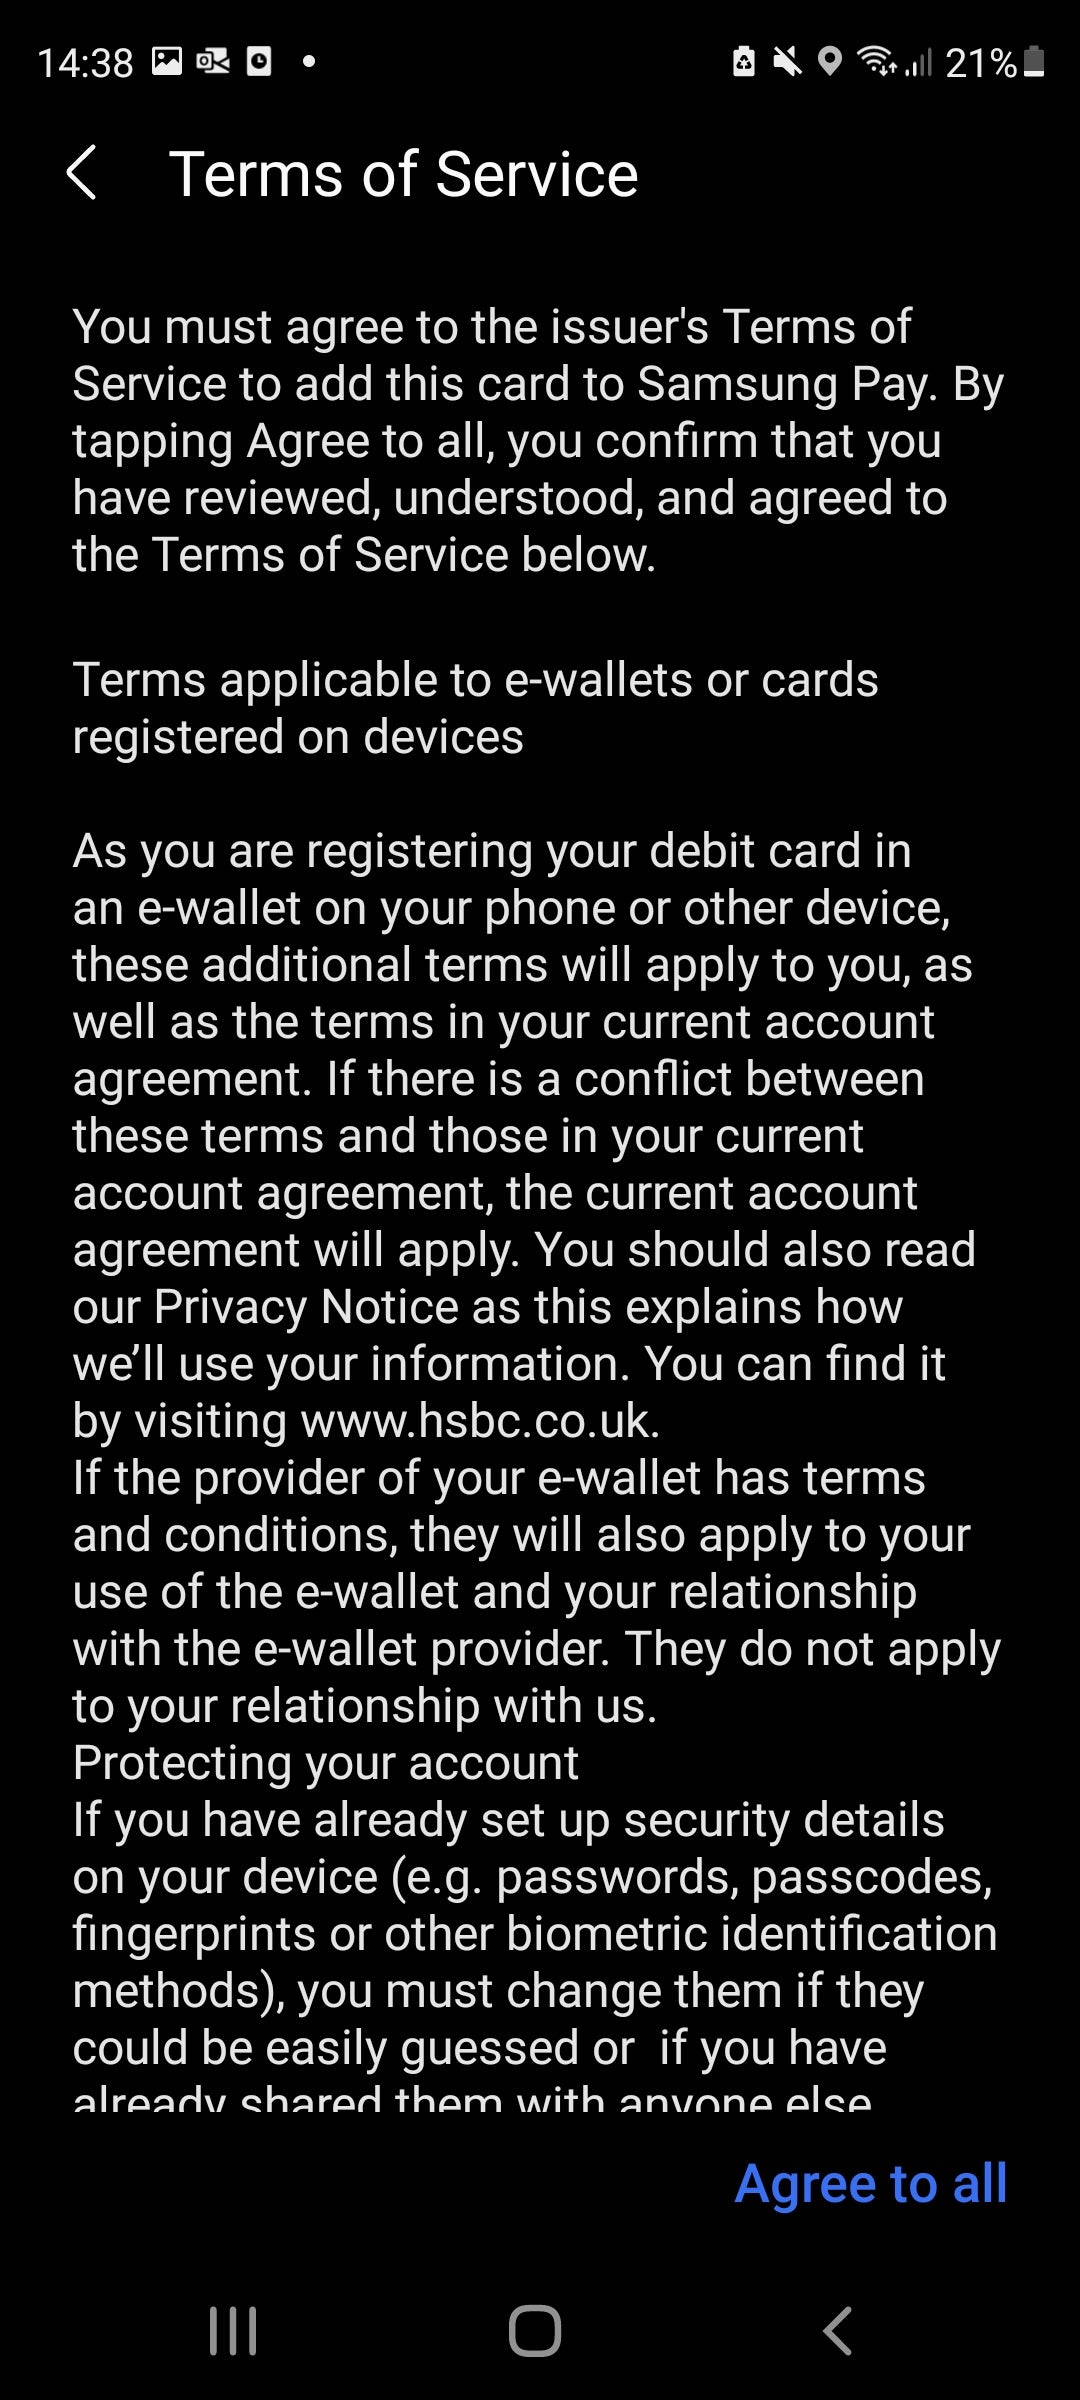 Samsung Pay terms and conditions